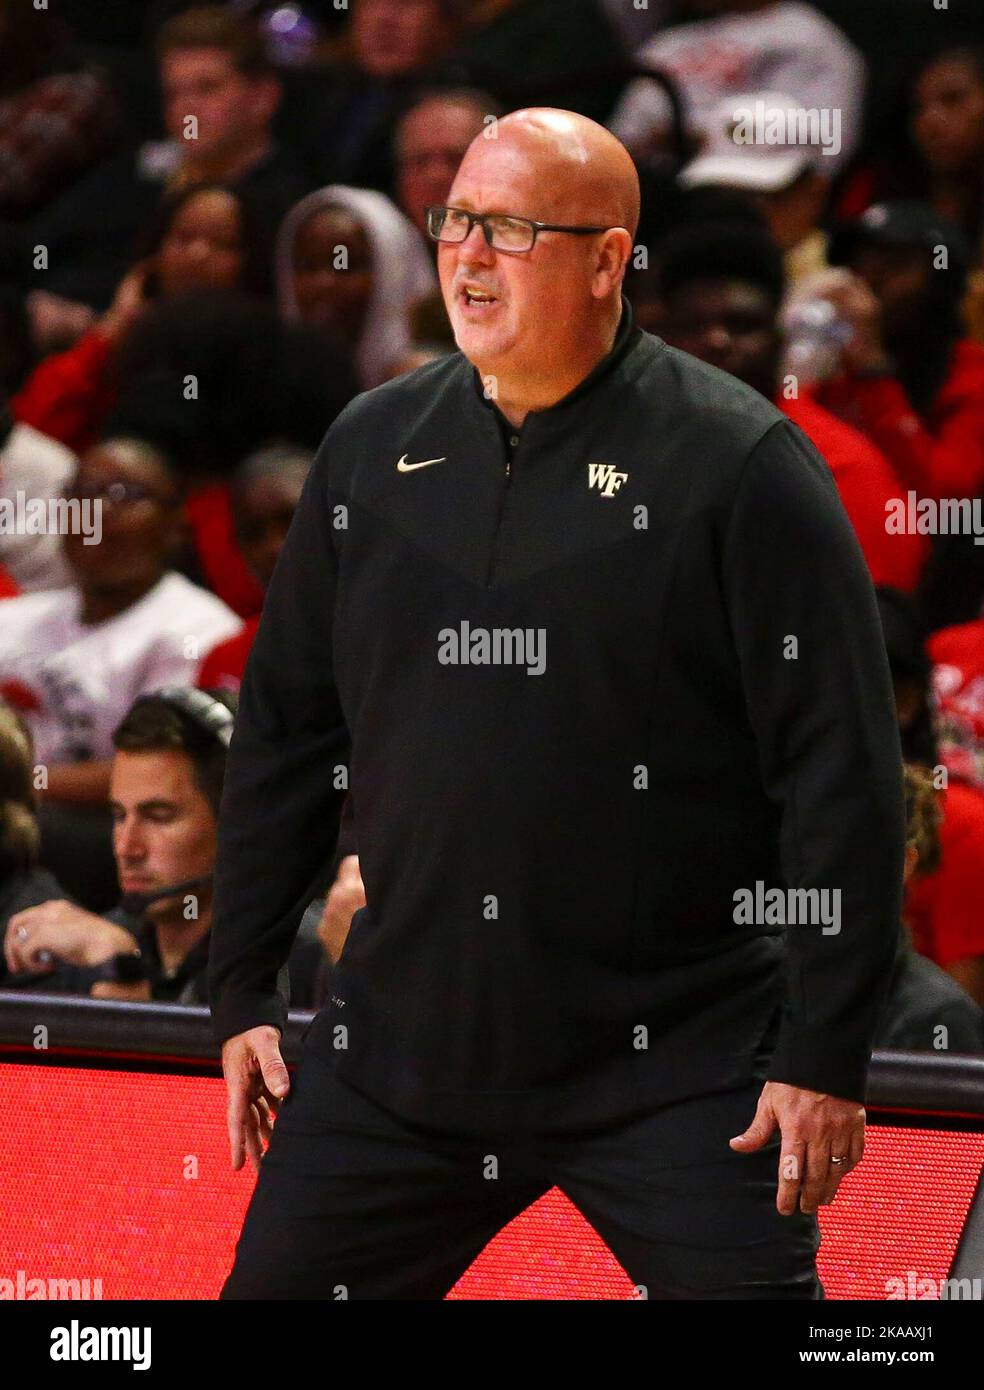 November 1, 2022: Steve Forbes head men's basketball coach for Wake Forest. NCAA basketball game between Winston Salem State and Wake Forest at Lawrence Joel Veterans Memorial Coliseum, Winston Salem. NC David Beach/CSM Stock Photo